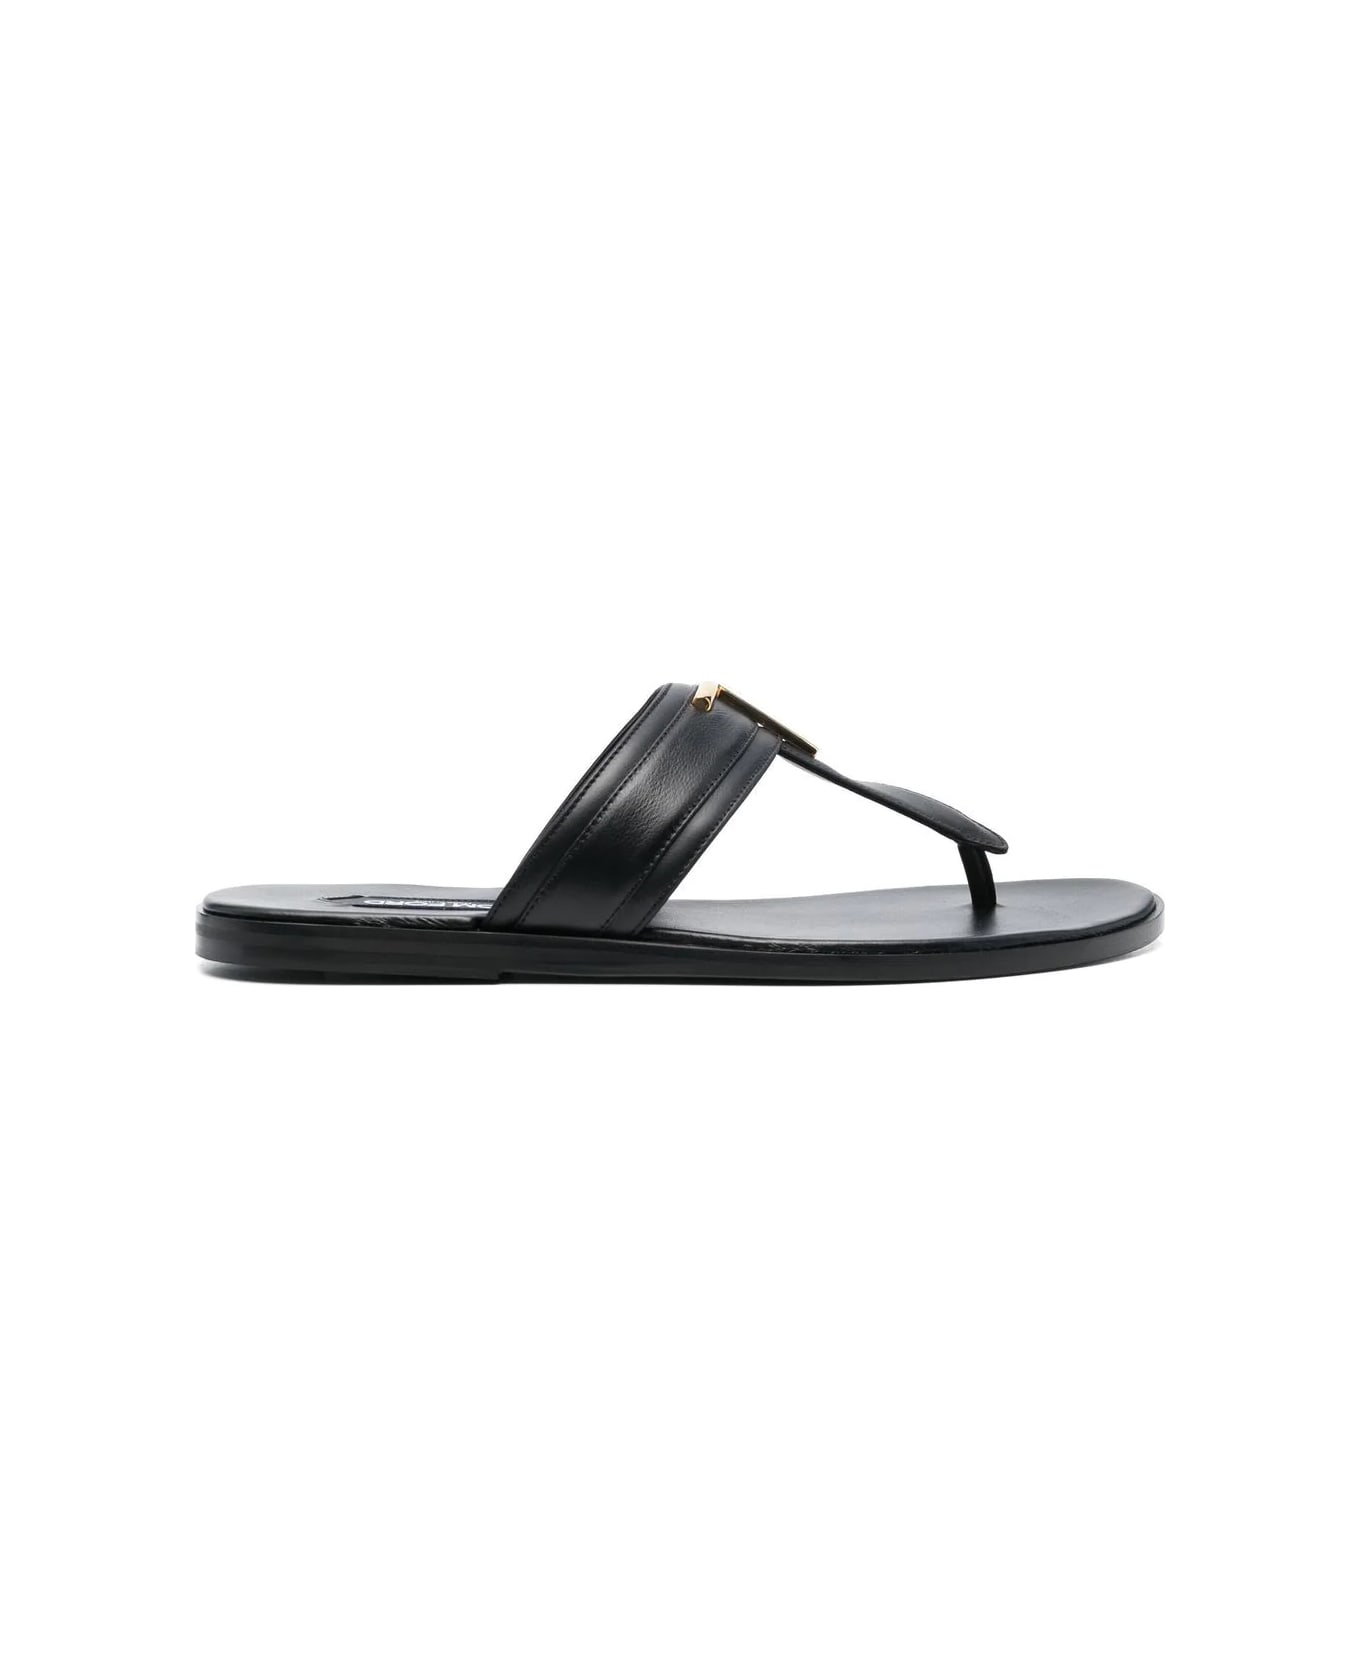 Tom Ford Smooth Leather Sandals - Black その他各種シューズ